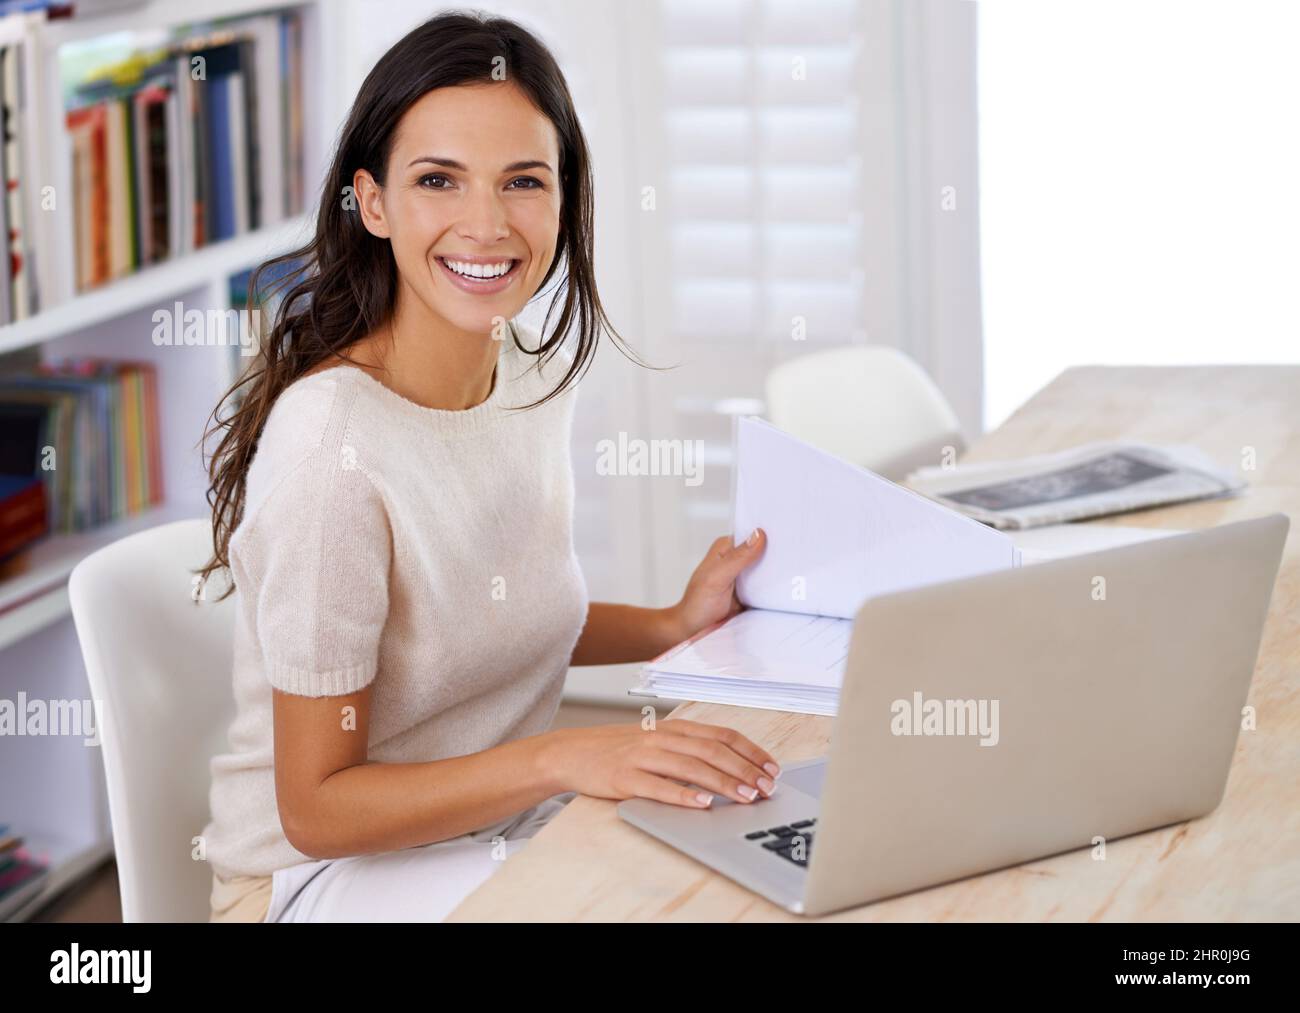 Enjoying the internet and all its freedom. Portrait of an attractive young woman using her laptop at home. Stock Photo